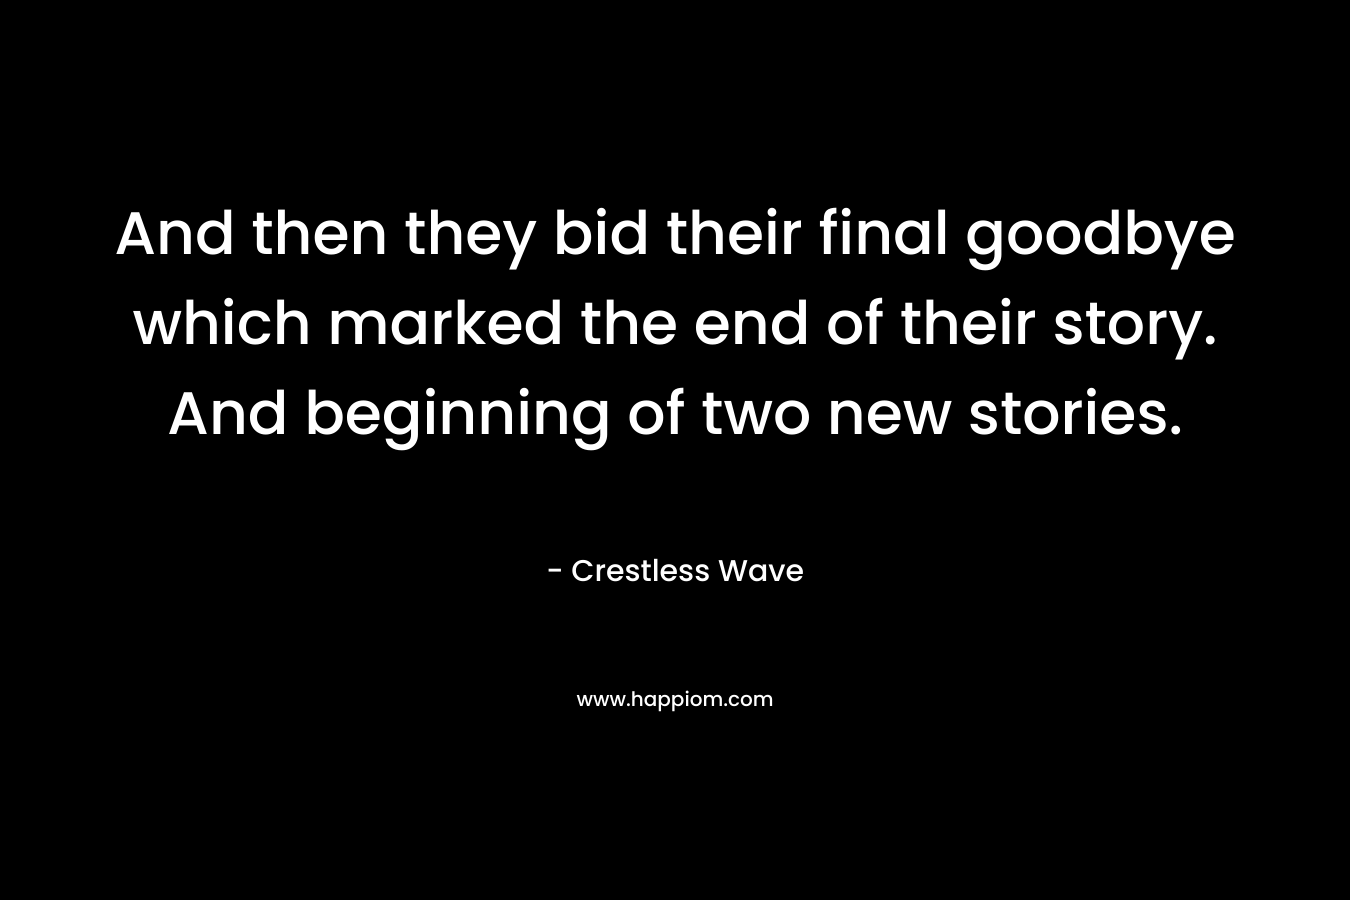 And then they bid their final goodbye which marked the end of their story. And beginning of two new stories. – Crestless Wave